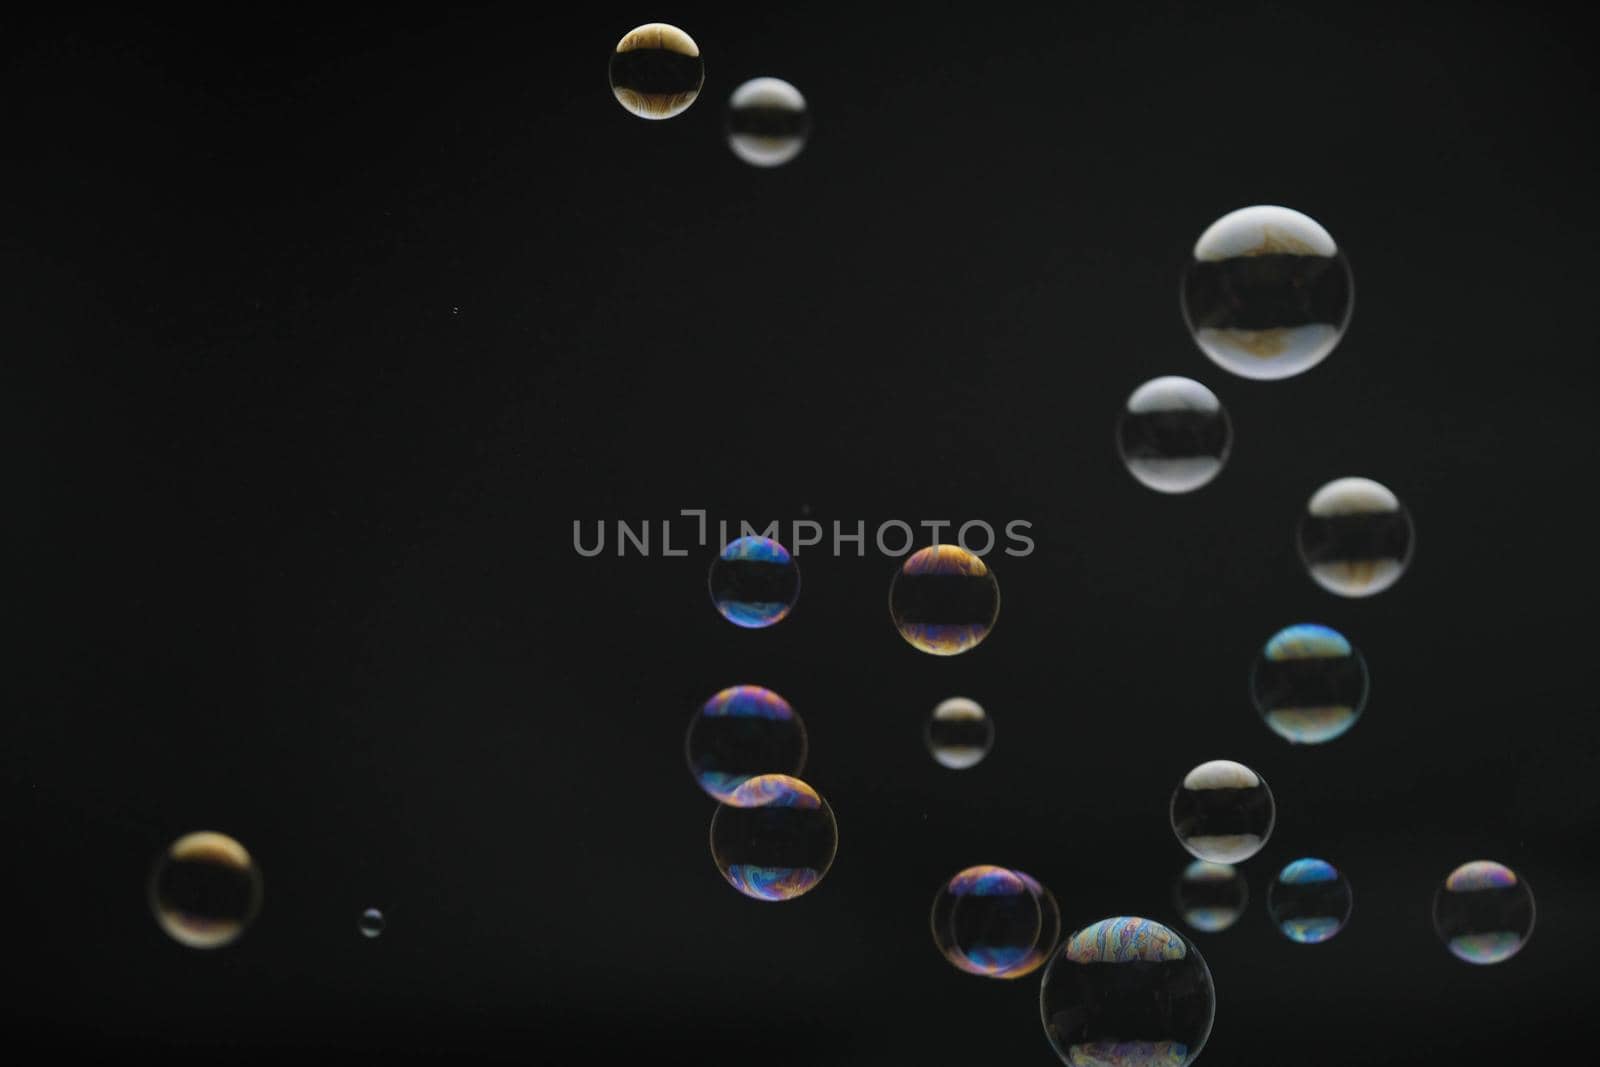 Flying soap bubbles on black background. Abstract soap bubbles with colorful reflections. Soap bubbles in motion background.